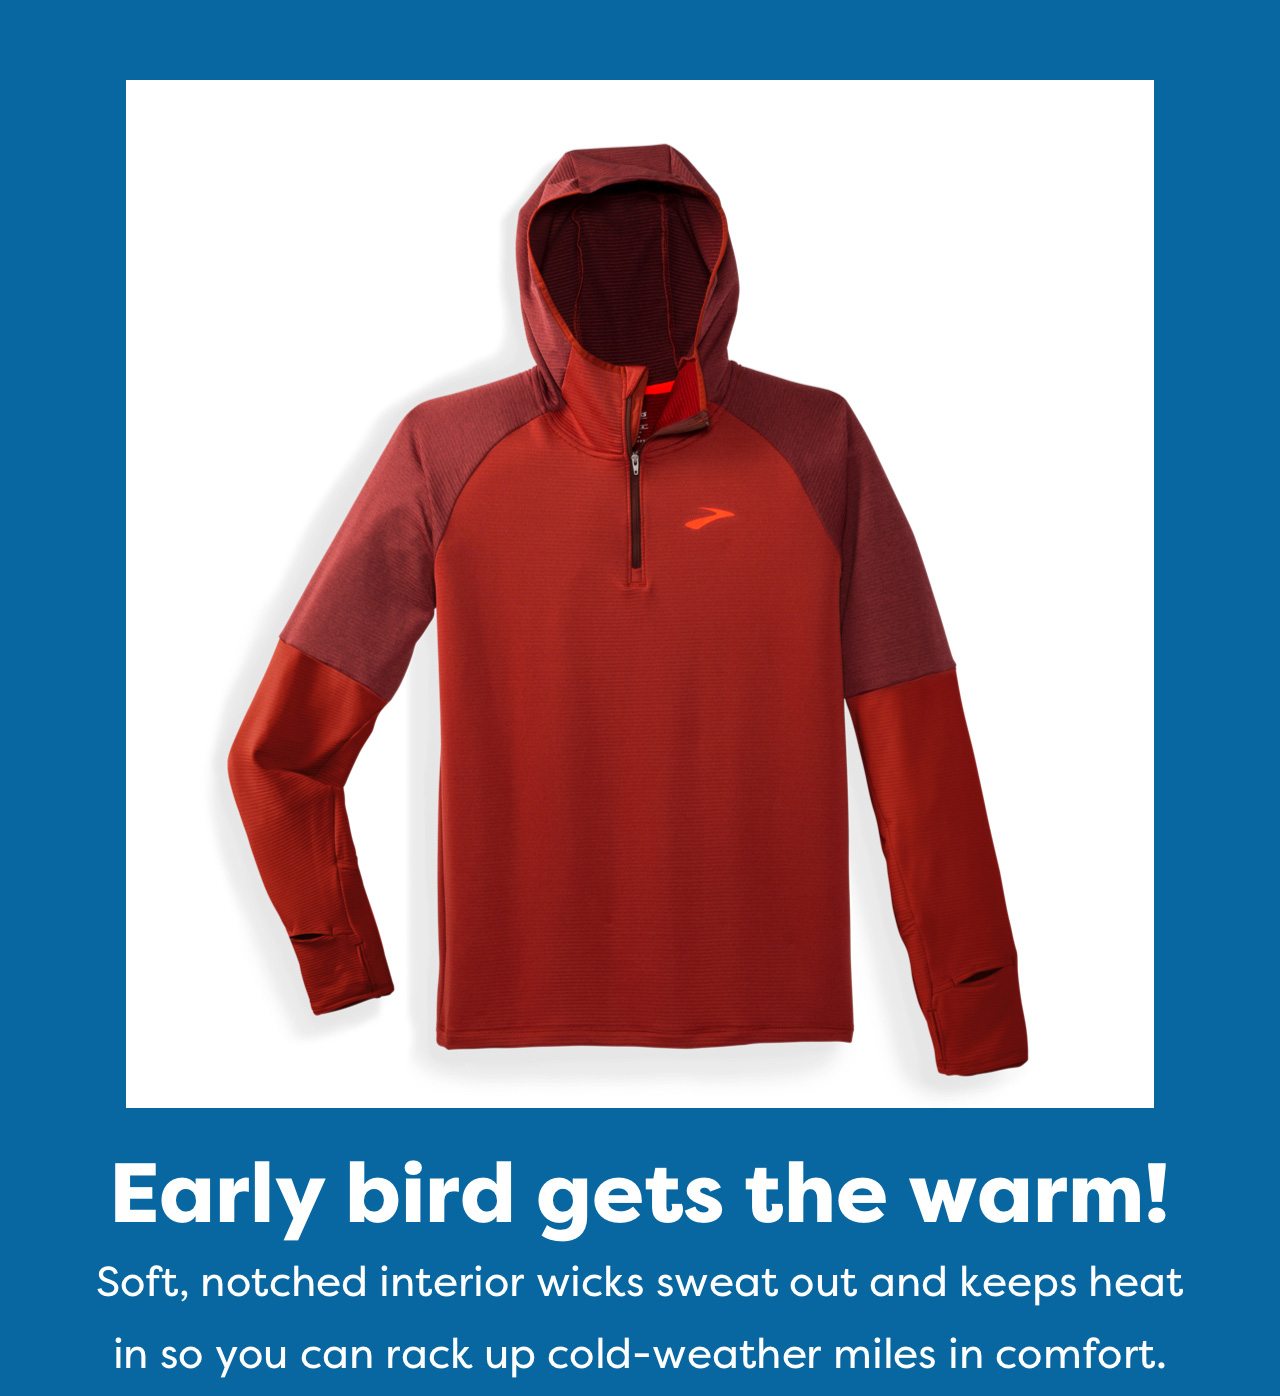 Early bird gets the warm! | Soft, notched interior wicks sweat out and keeps heat in so you can rack up cold-weather miles in comfort.